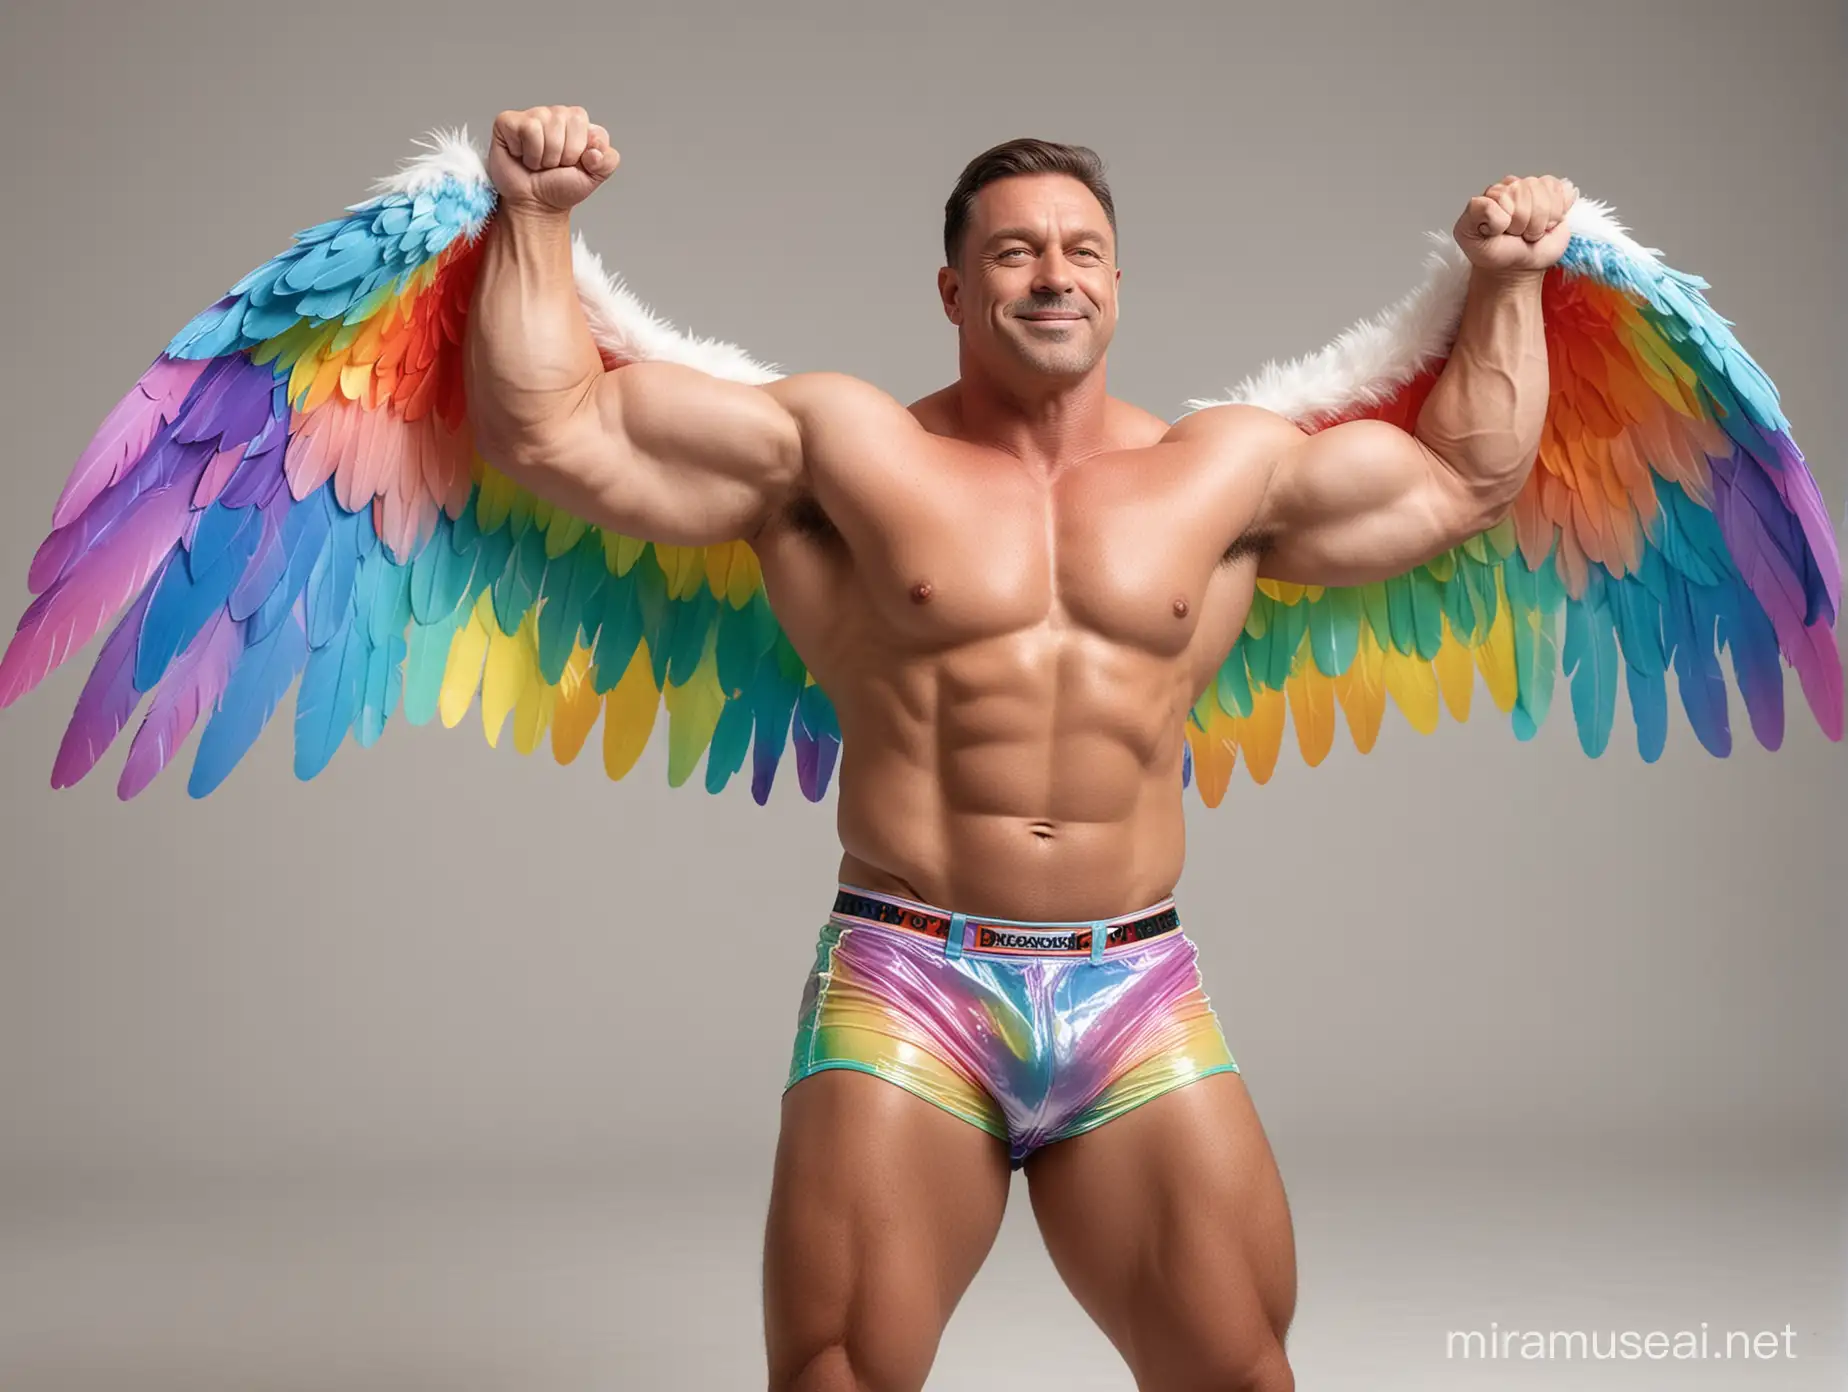 Topless 40s Bodybuilder Daddy Flexing with RainbowColored Eagle Wings and Doraemon